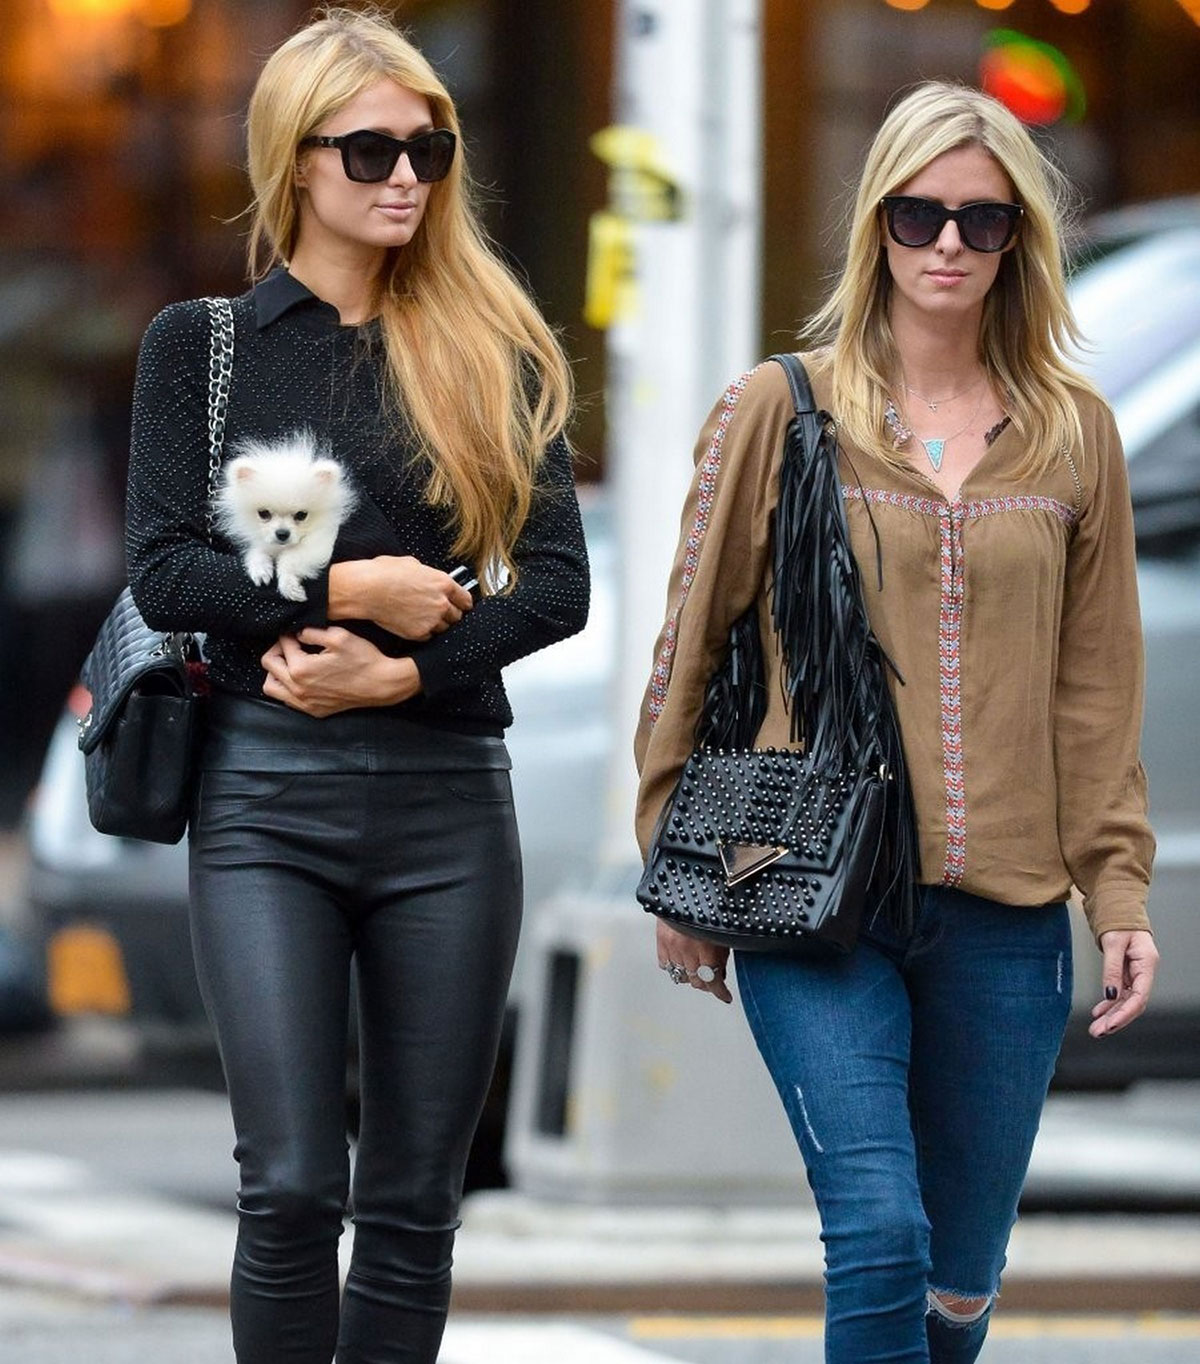 Paris and Nicky Hilton were spotted in New York City